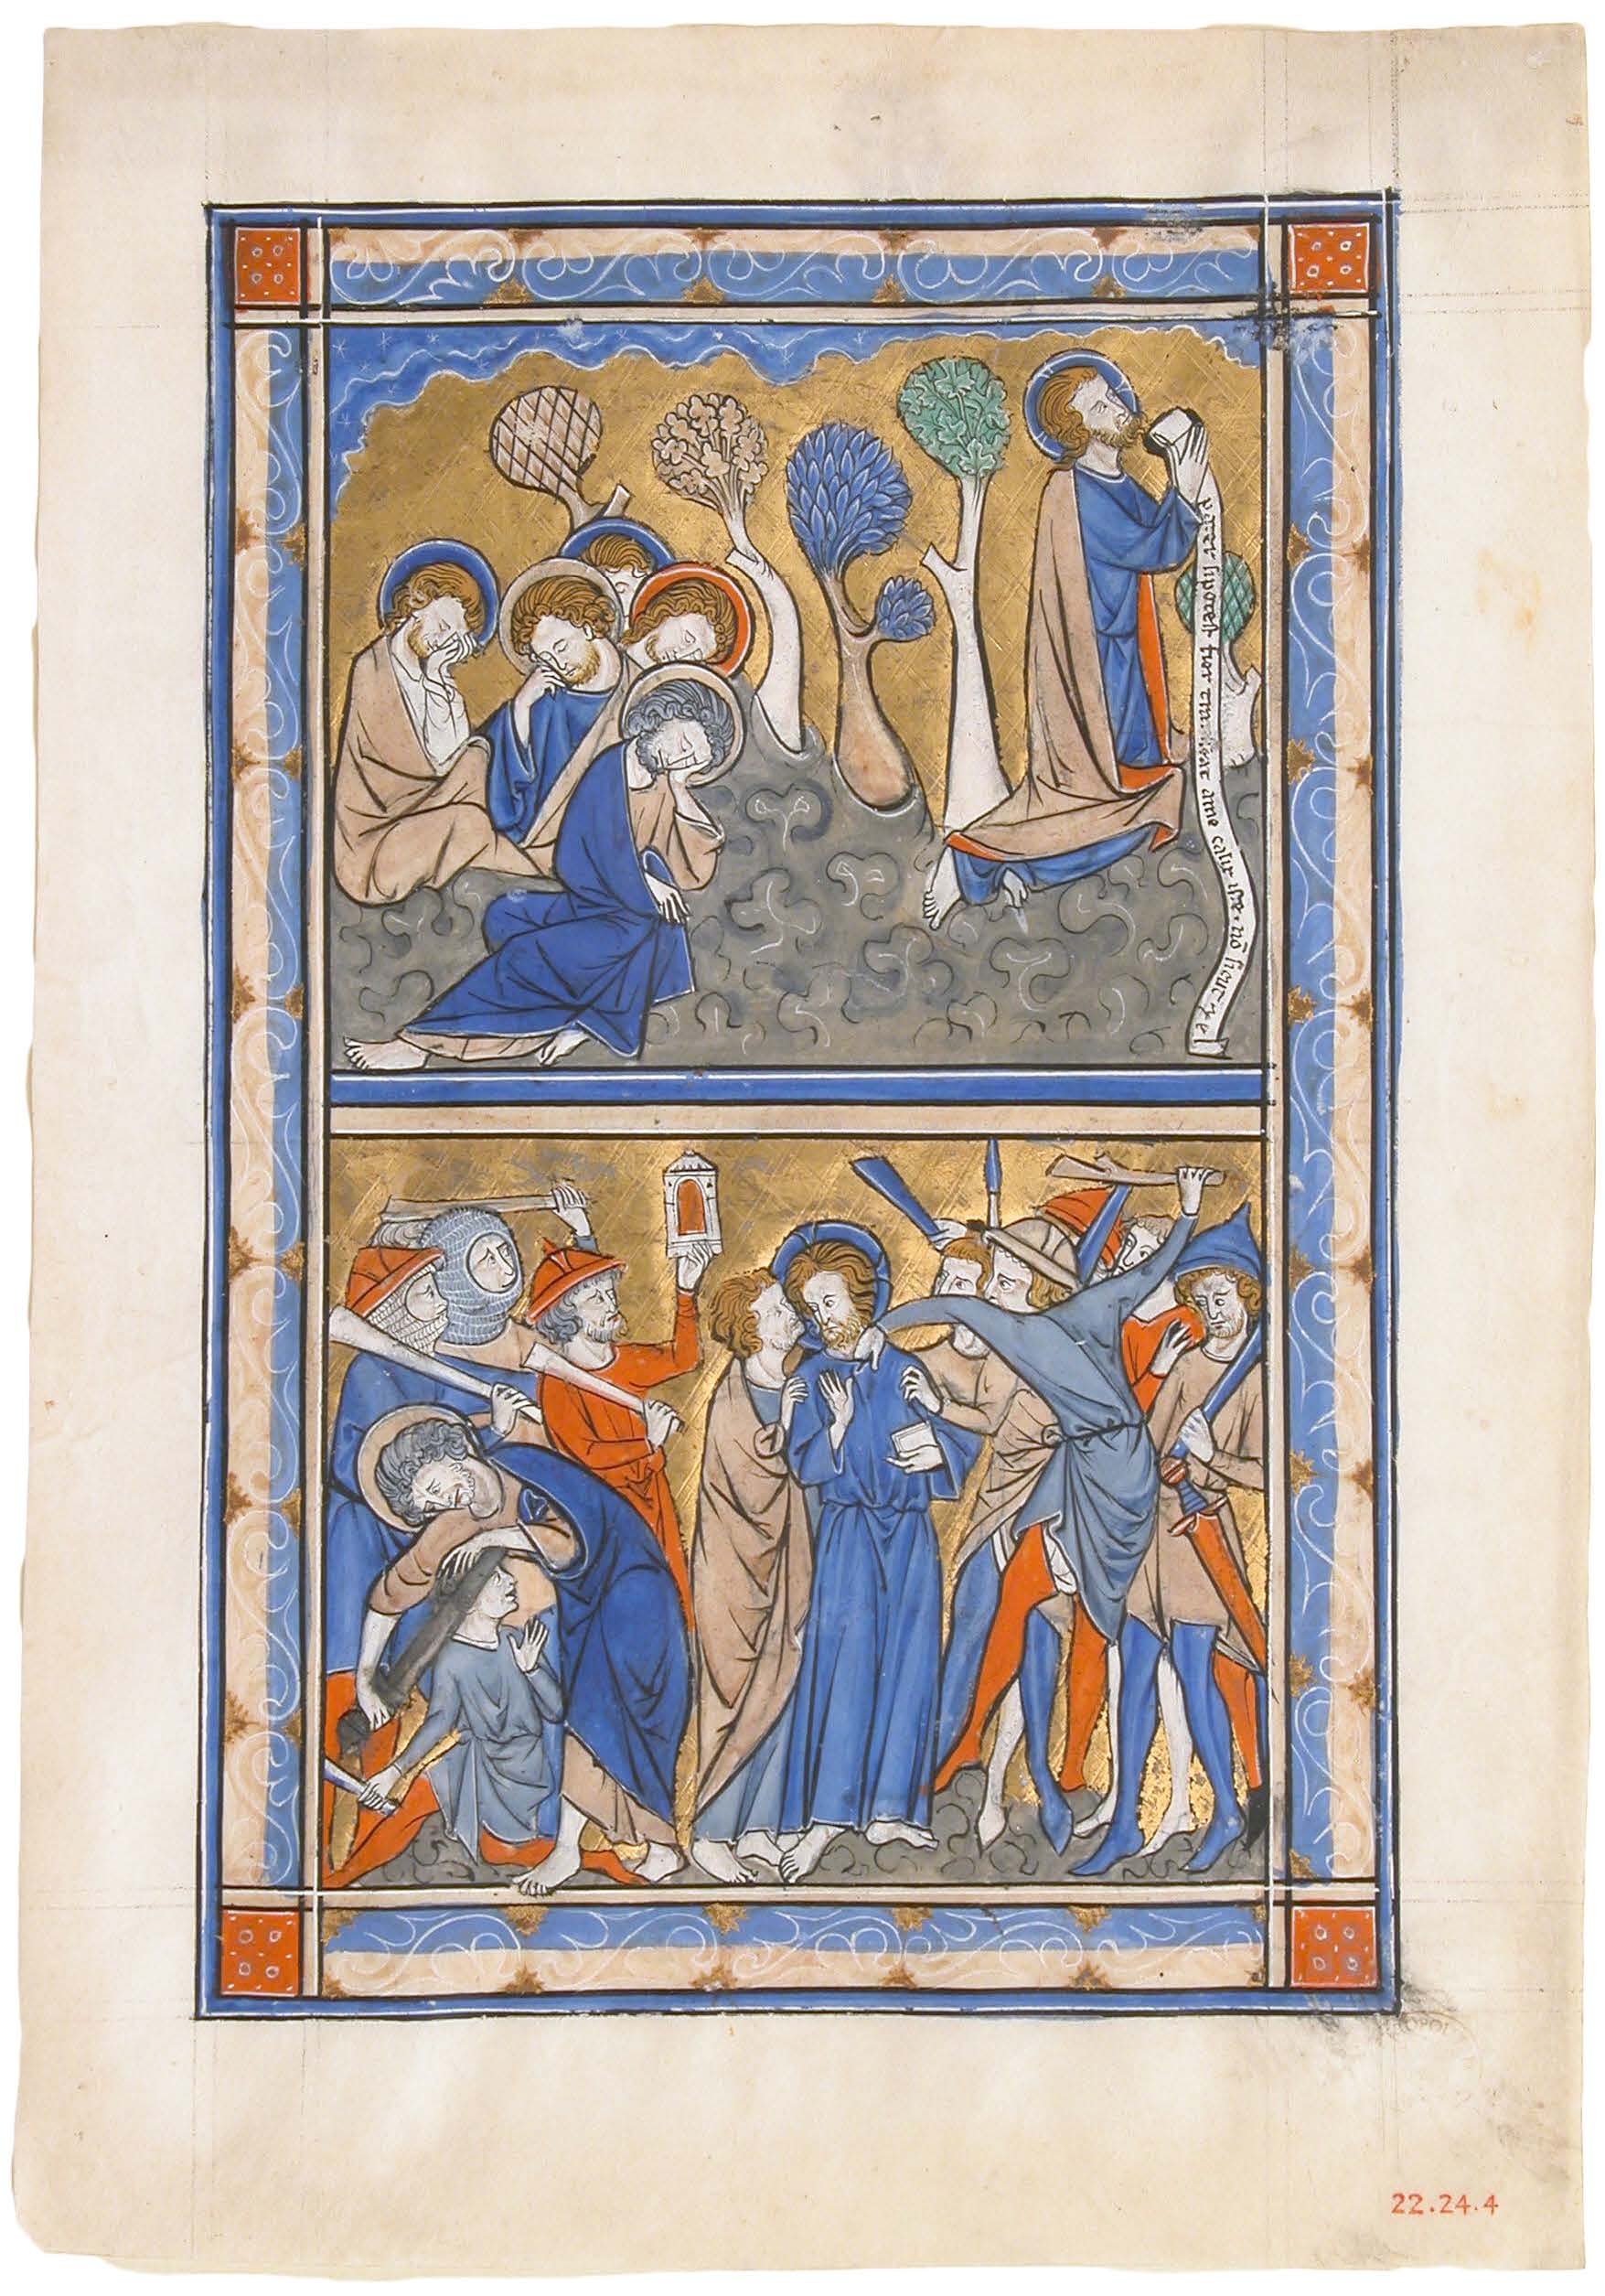 “And being in an agony he prayed more earnestly: and his sweat was as it were great drops of blood falling down to the ground” (Luke 22:44). Manuscript Leaf with the Agony in the Garden and Betrayal of Christ, from a Royal Psalter, ca. 1270. The Metropolitan Museum of Art, New York, Rogers Fund, 1922.